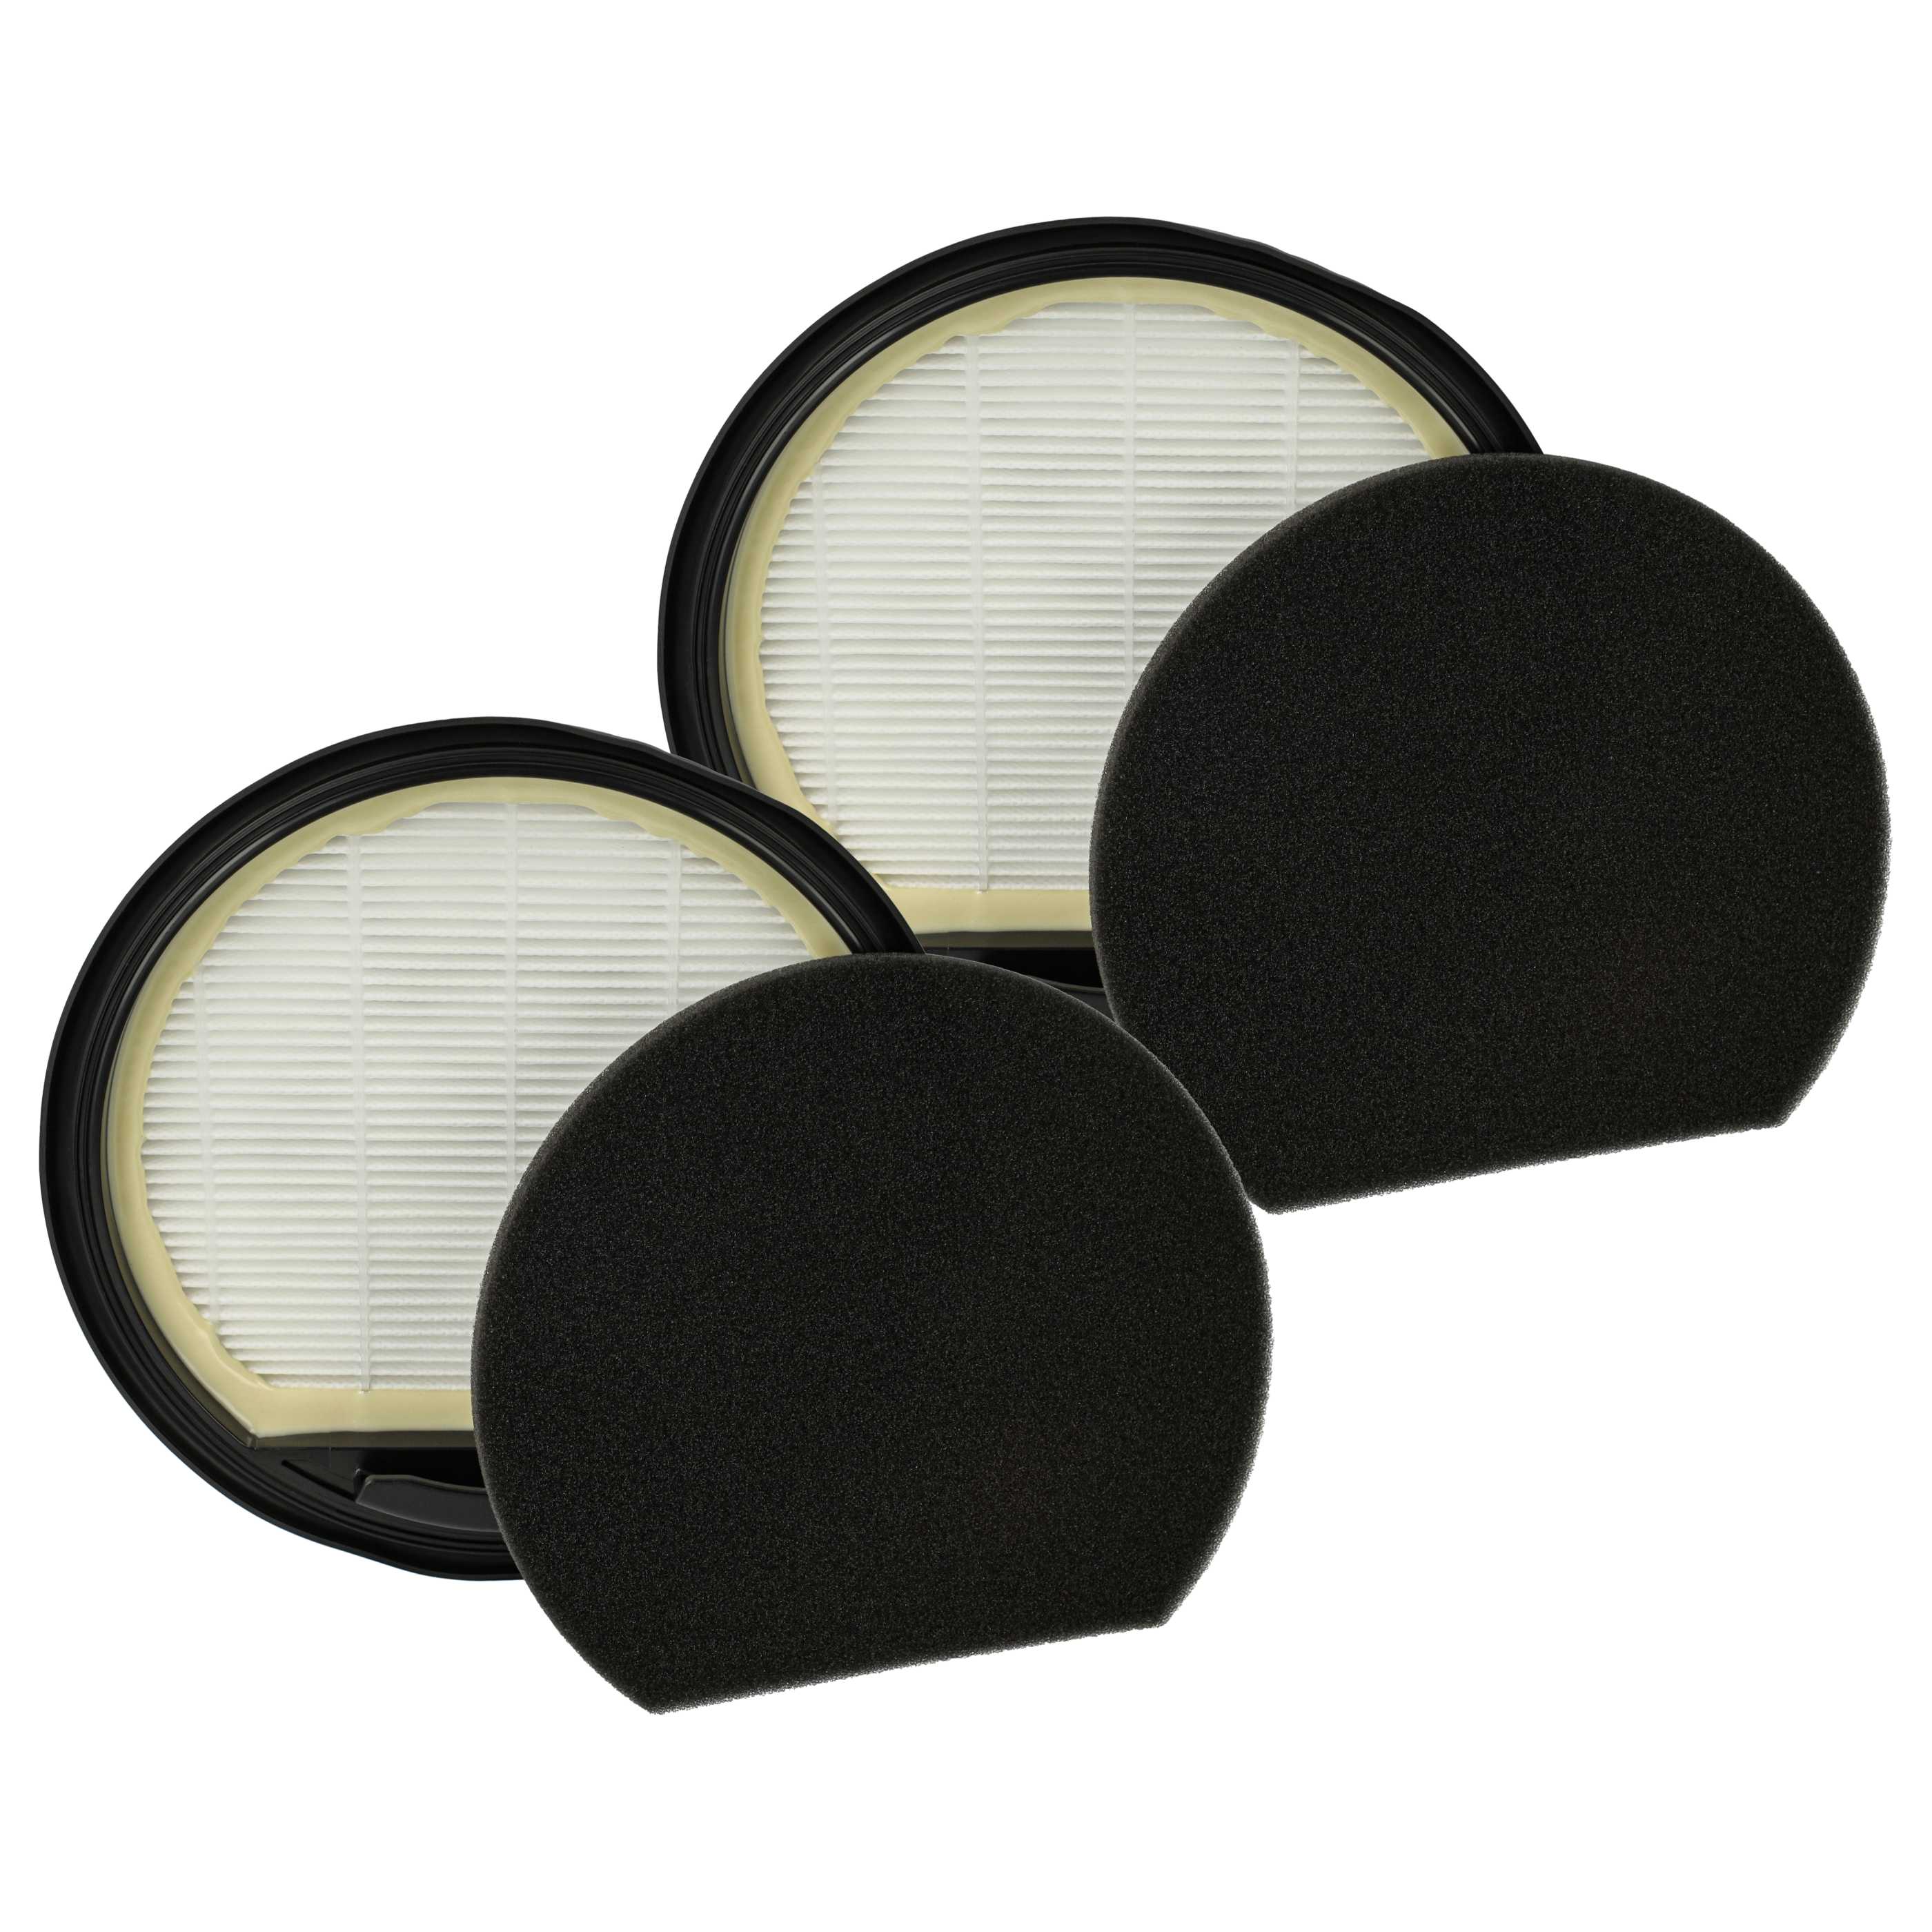 2x exhaust filter replaces Bosch 12022118, 6.05.06.27-0 for BoschVacuum Cleaner